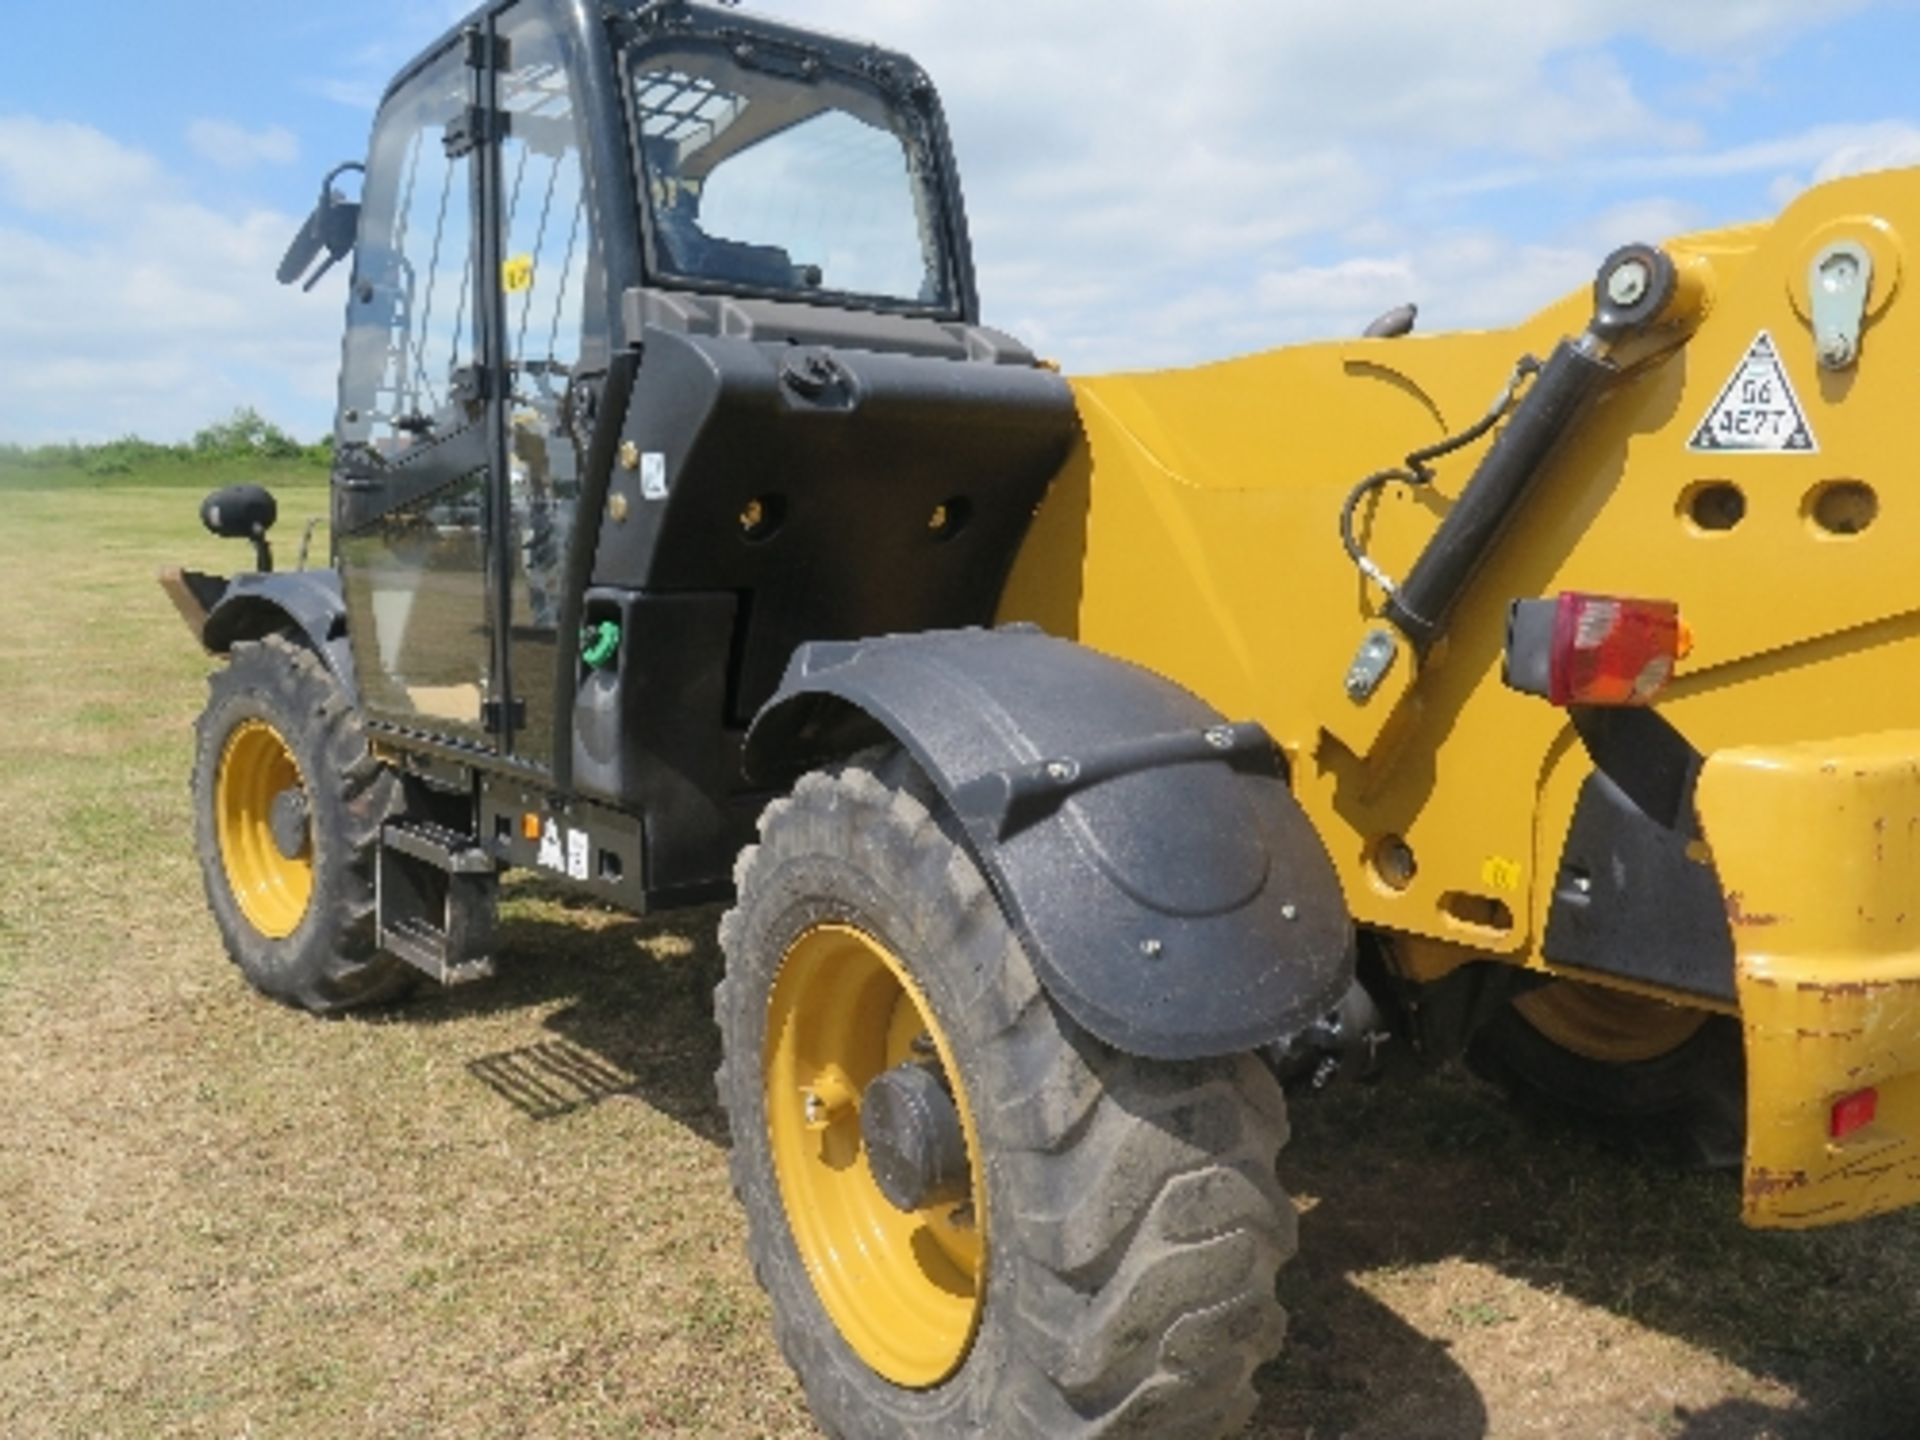 Caterpillar TH414STD telehandler 2480 hrs 2011 TBZ00699
This lot is included by kind permission - Image 2 of 7